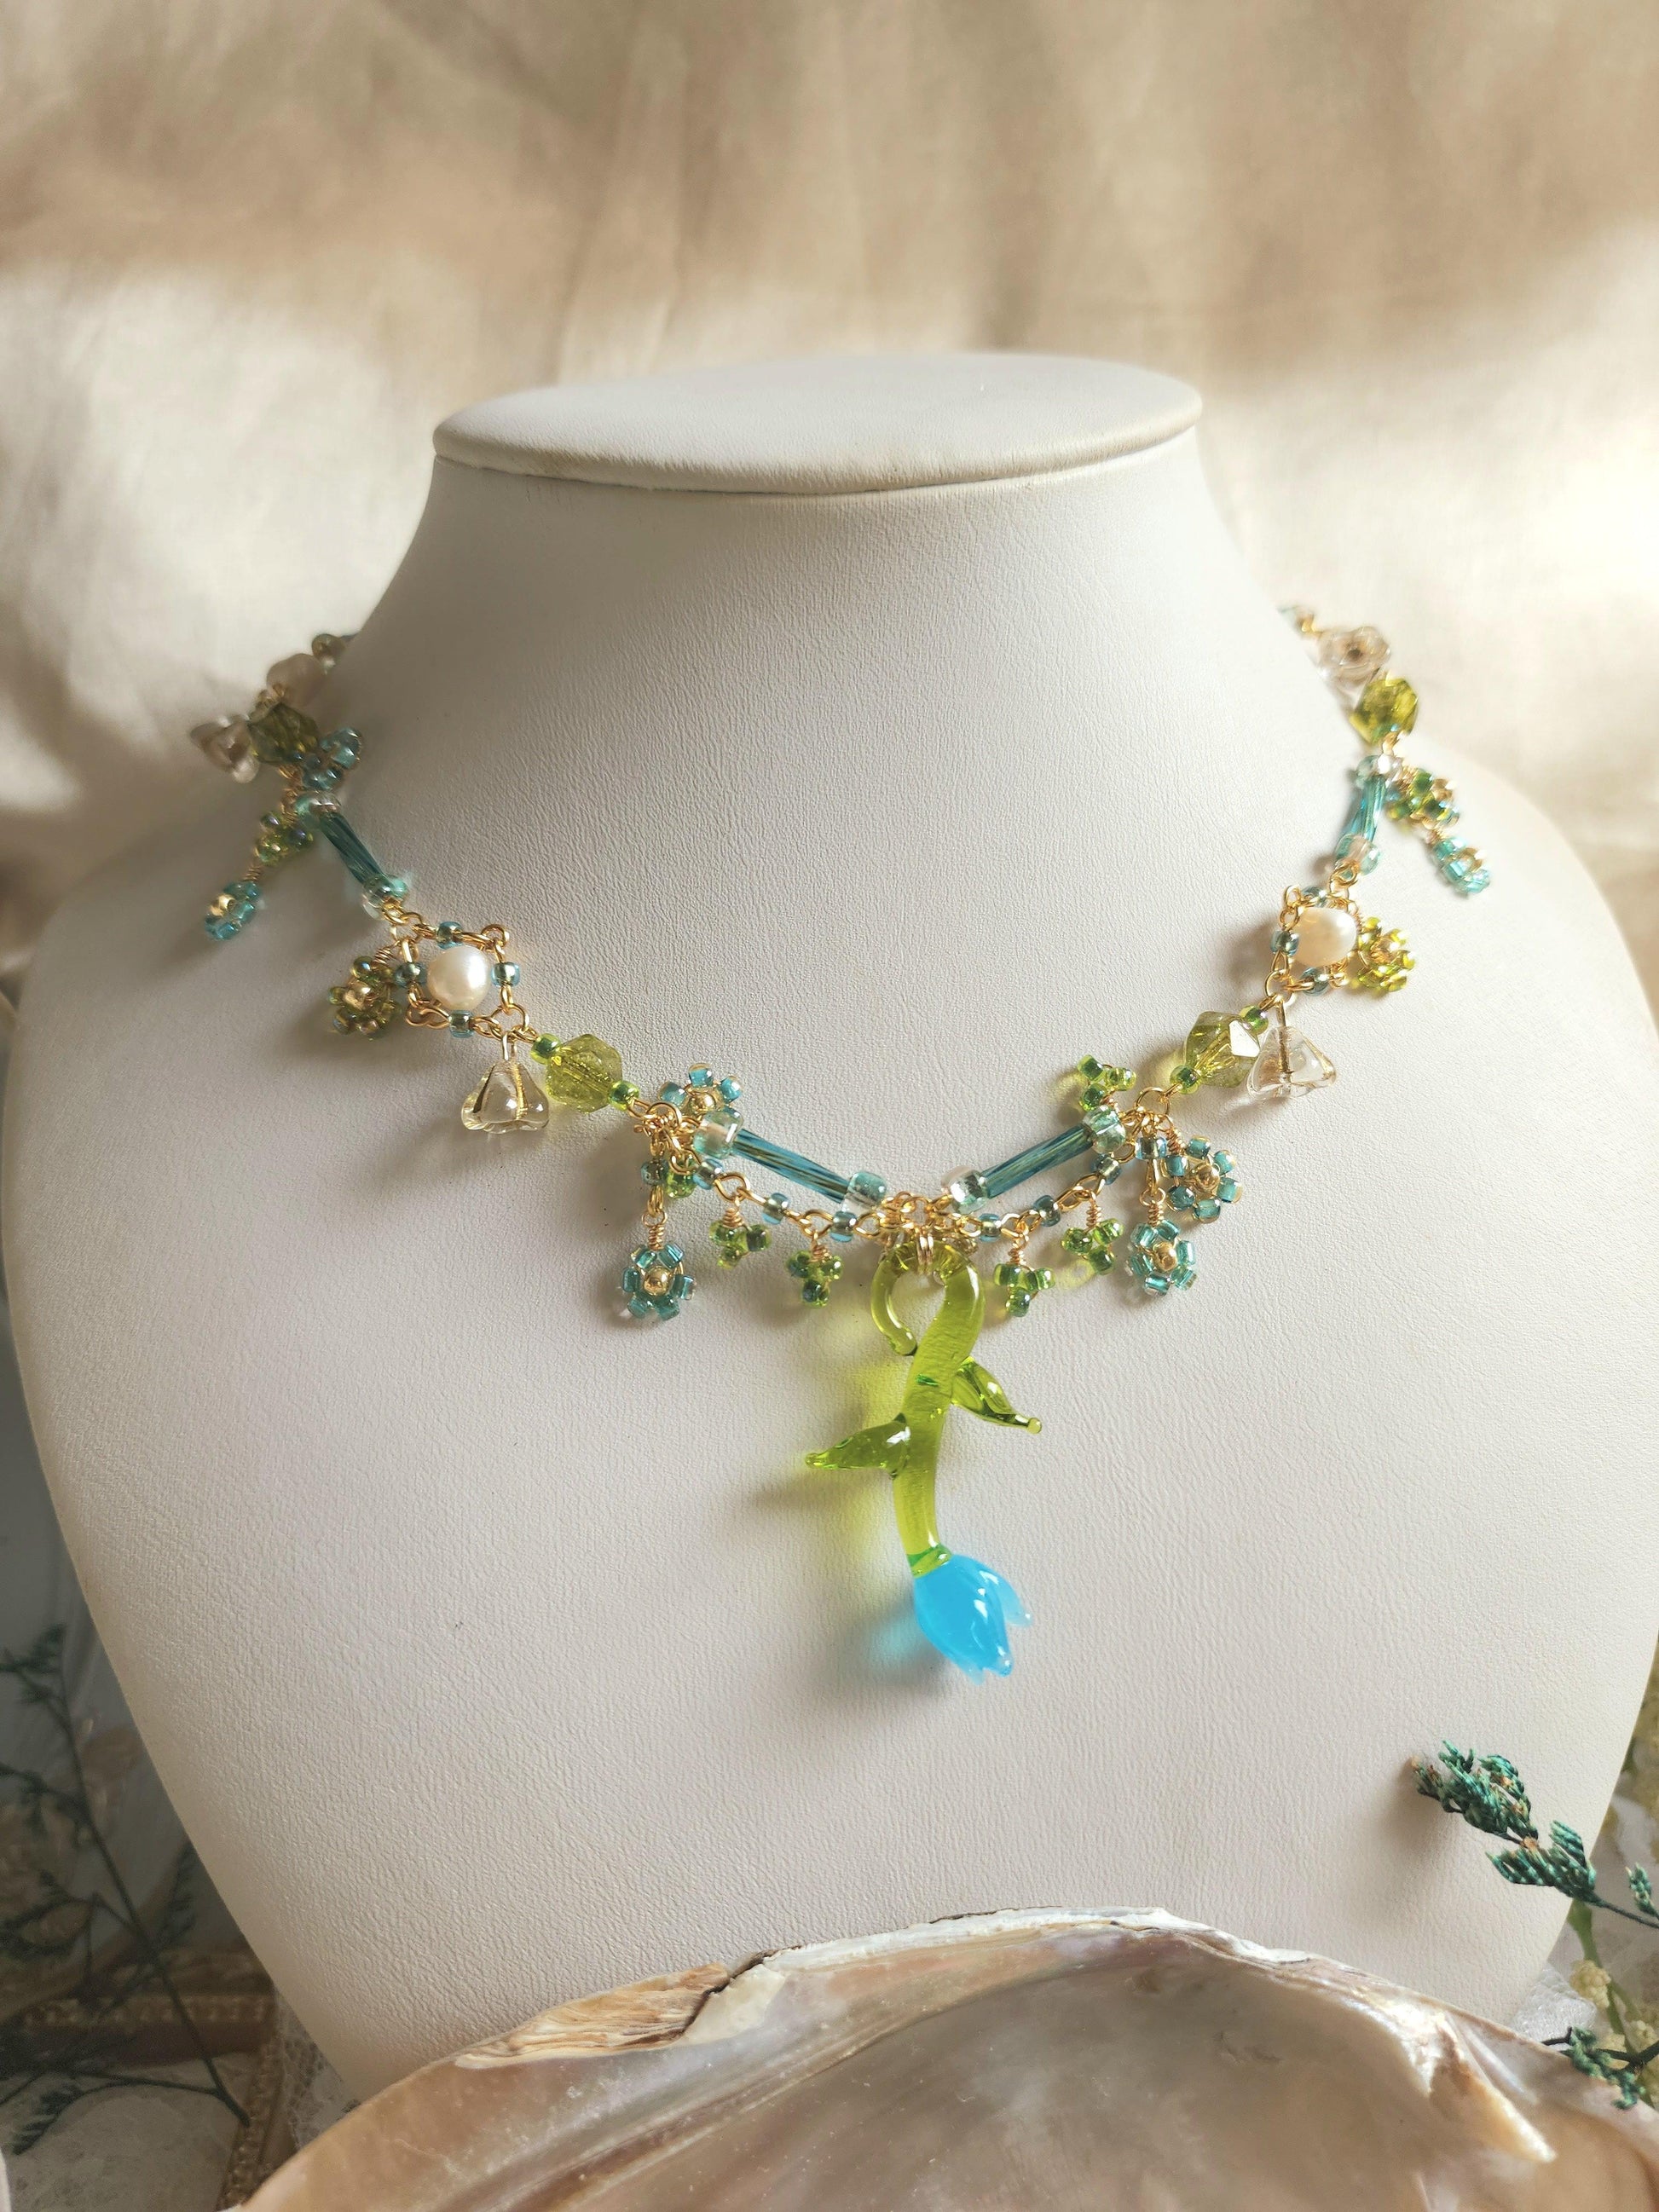 Seabed Rose Garden Necklace - By Cocoyu